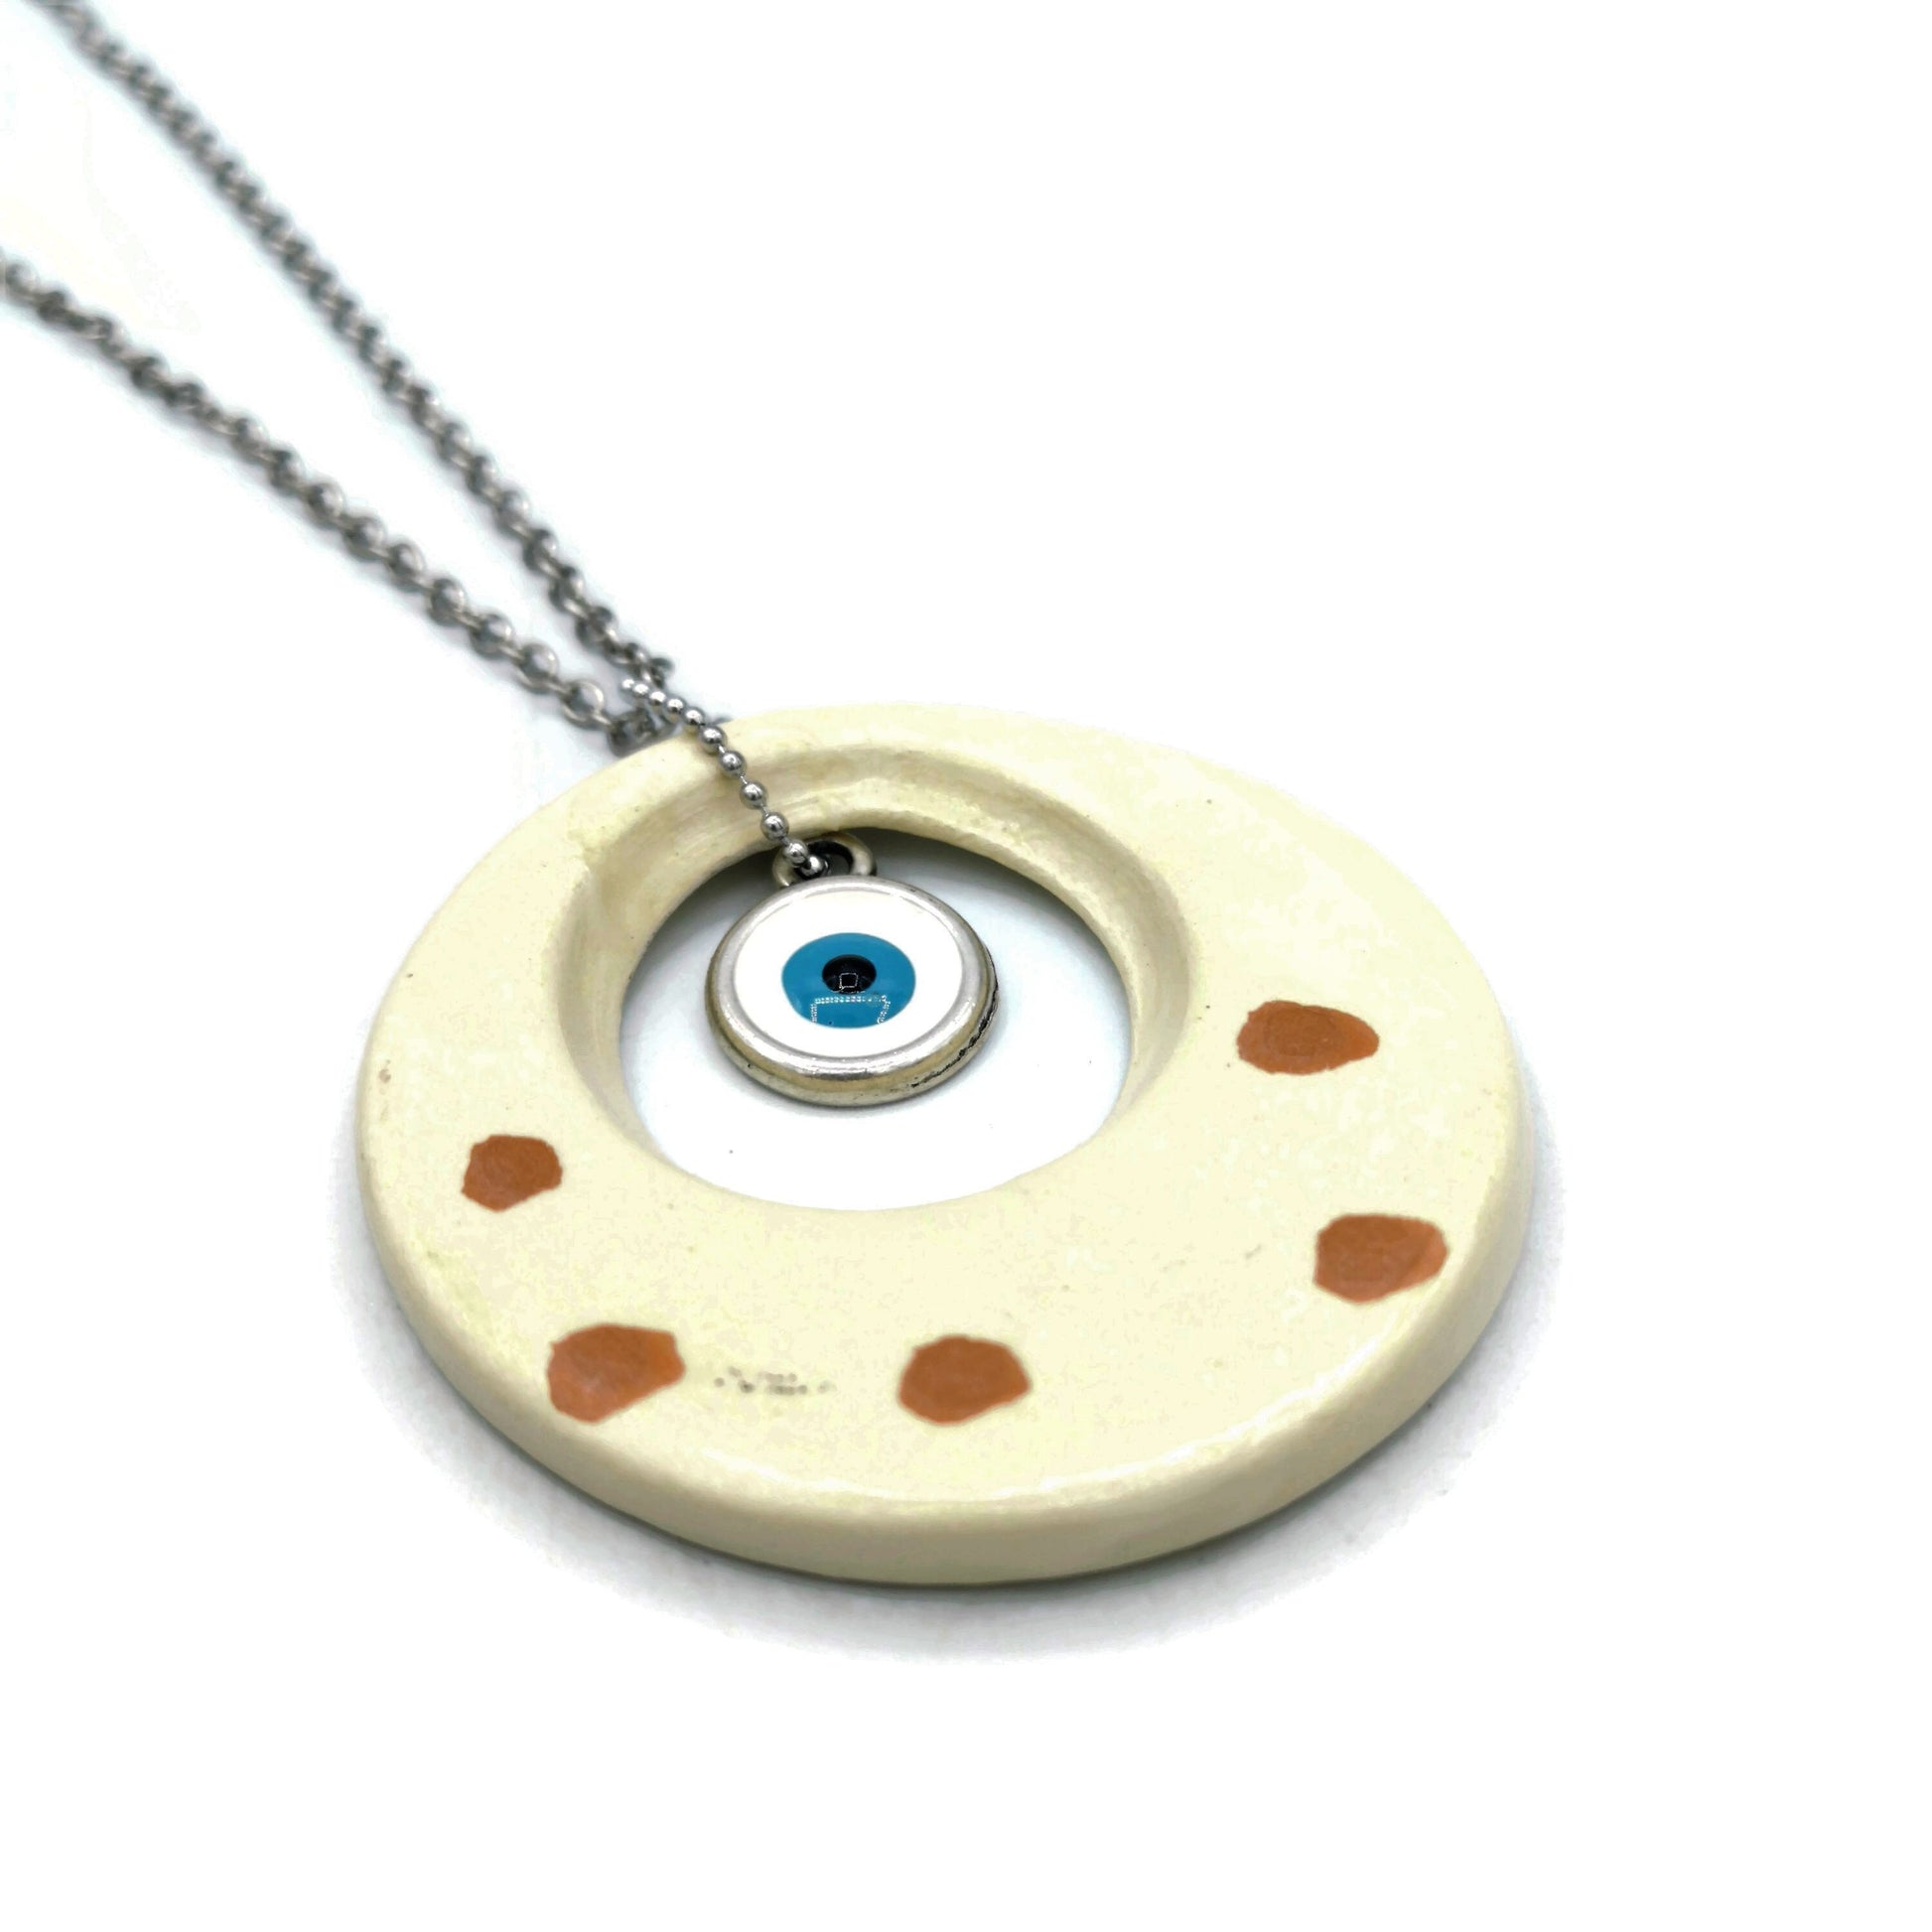 Large evil eye necklace for women, unique birthday gifts for sister, ceramic necklace pendant, 9th anniversary, Best Gifts For Her - Ceramica Ana Rafael